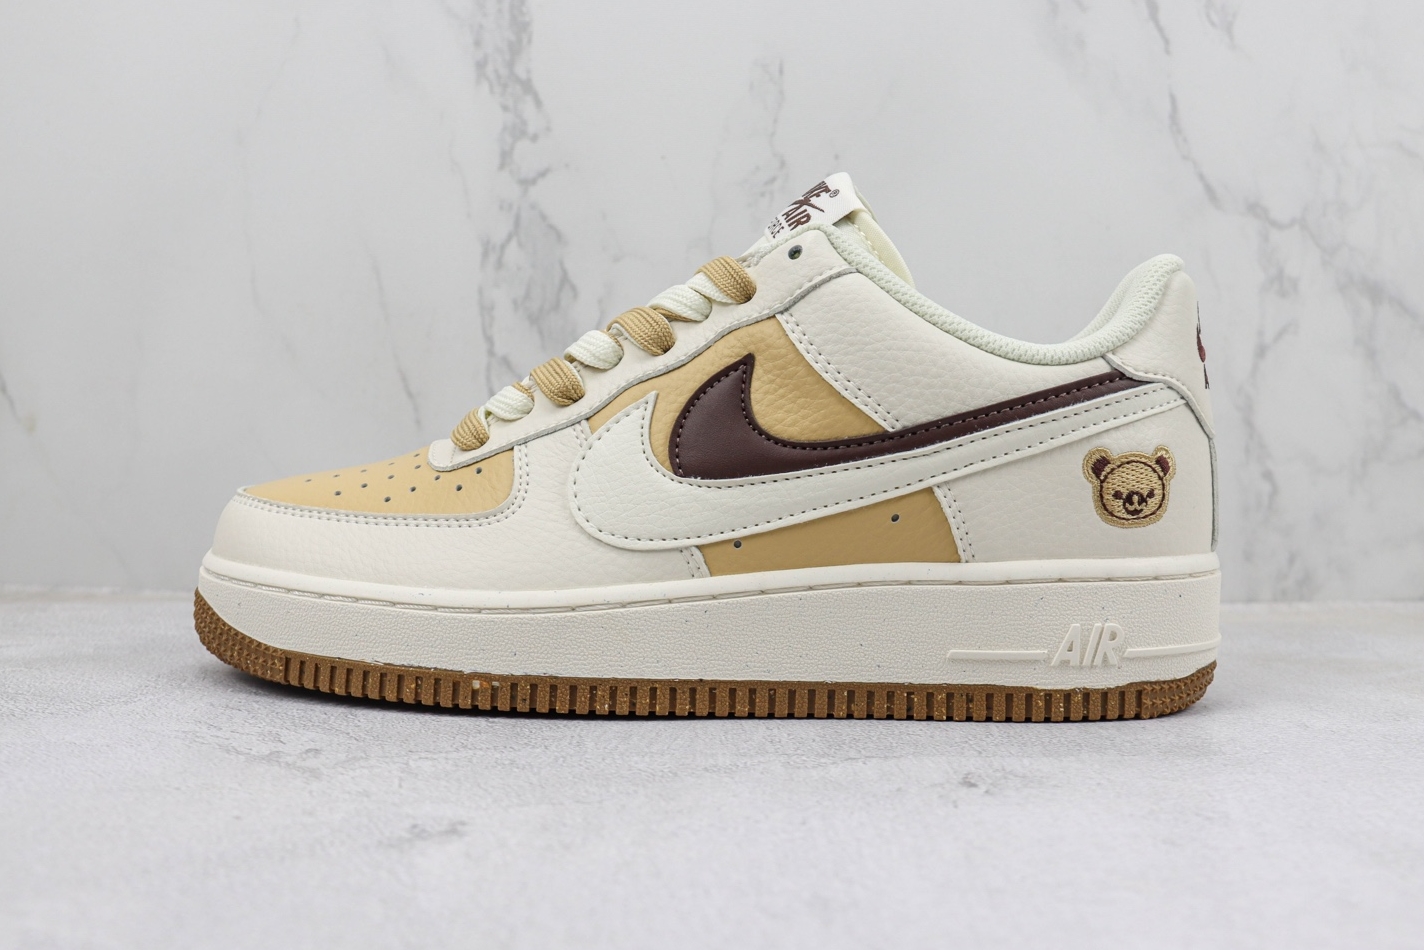 Nike Air Force 1 07 Low Rice White Brown Yellow CC2569-011 – Shop Now!